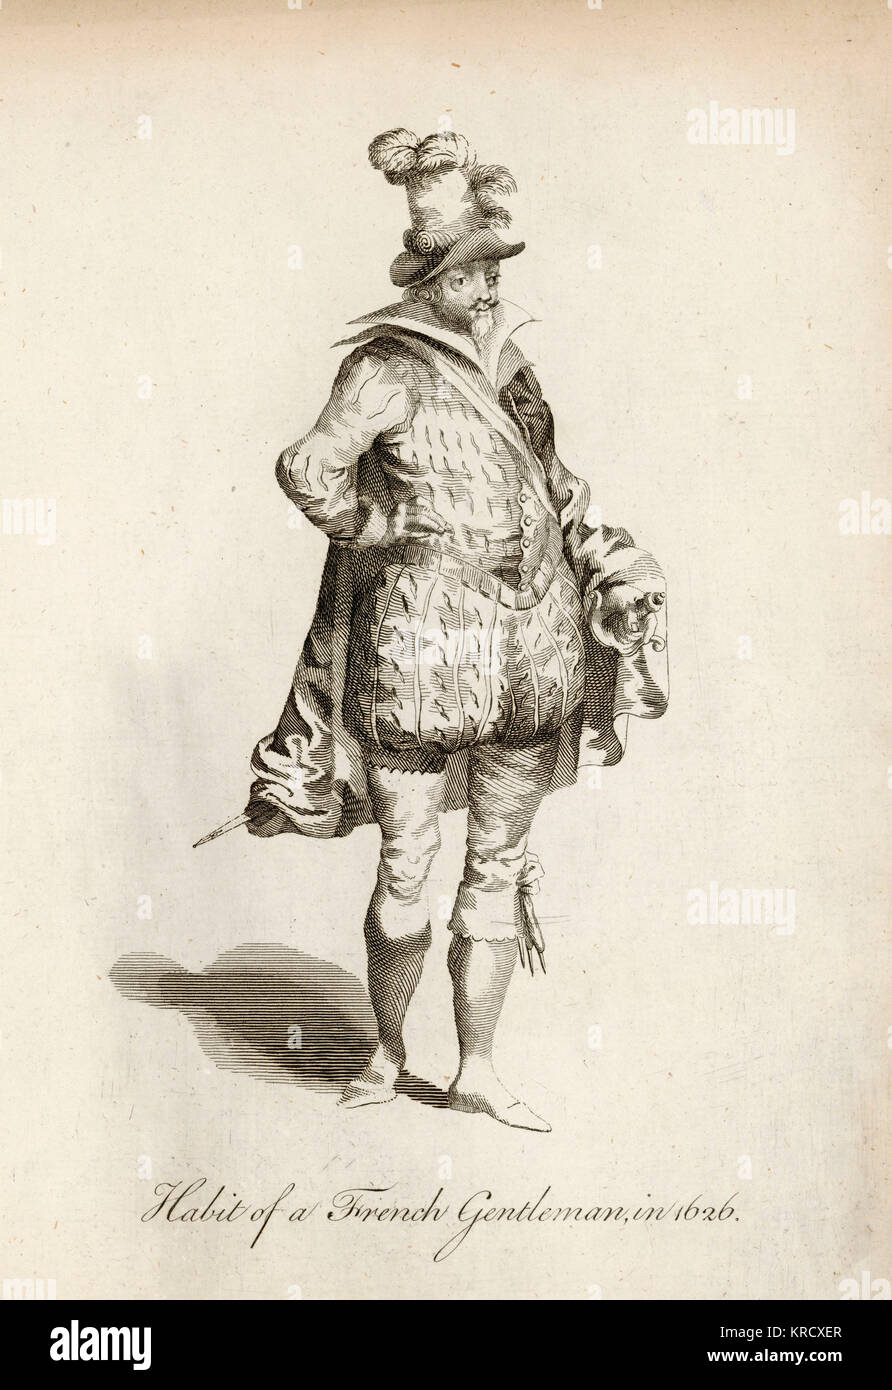 Habit of a French gentleman of 1626. Date: 1626 Stock Photo - Alamy